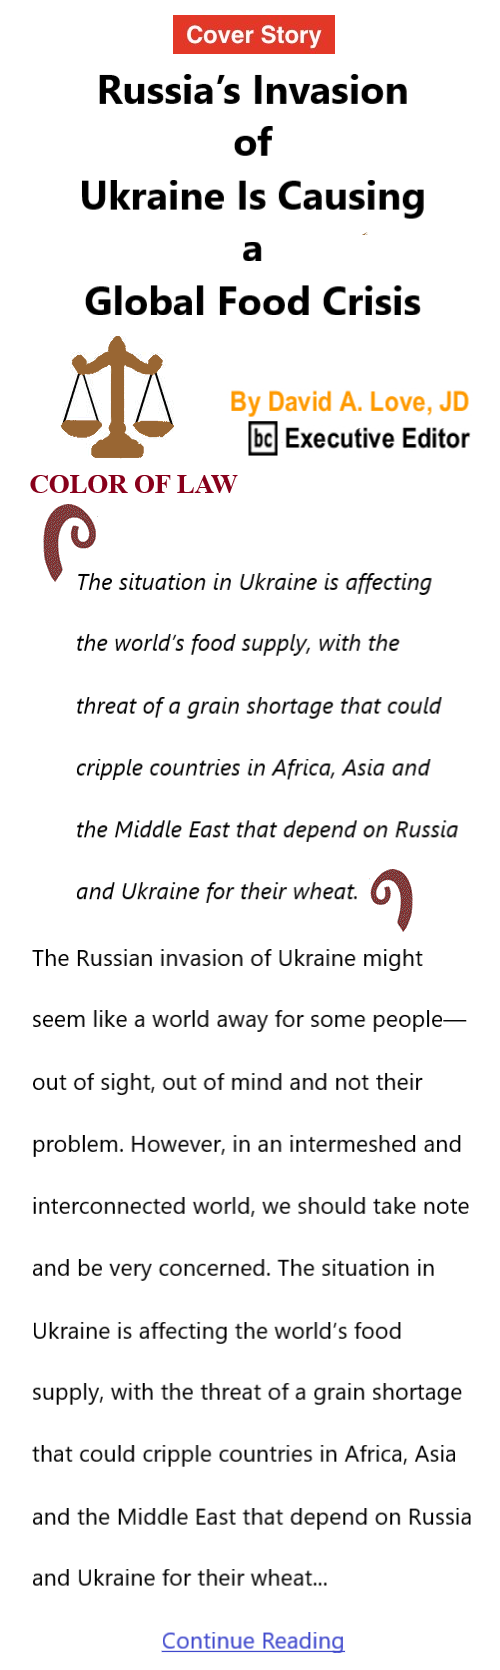 BlackCommentator.com Mar 31, 2022 - Issue 904: Cover Story - Russia’s Invasion of Ukraine Is Causing a Global Food Crisis - Color of Law By David A. Love, JD, BC Executive Editor